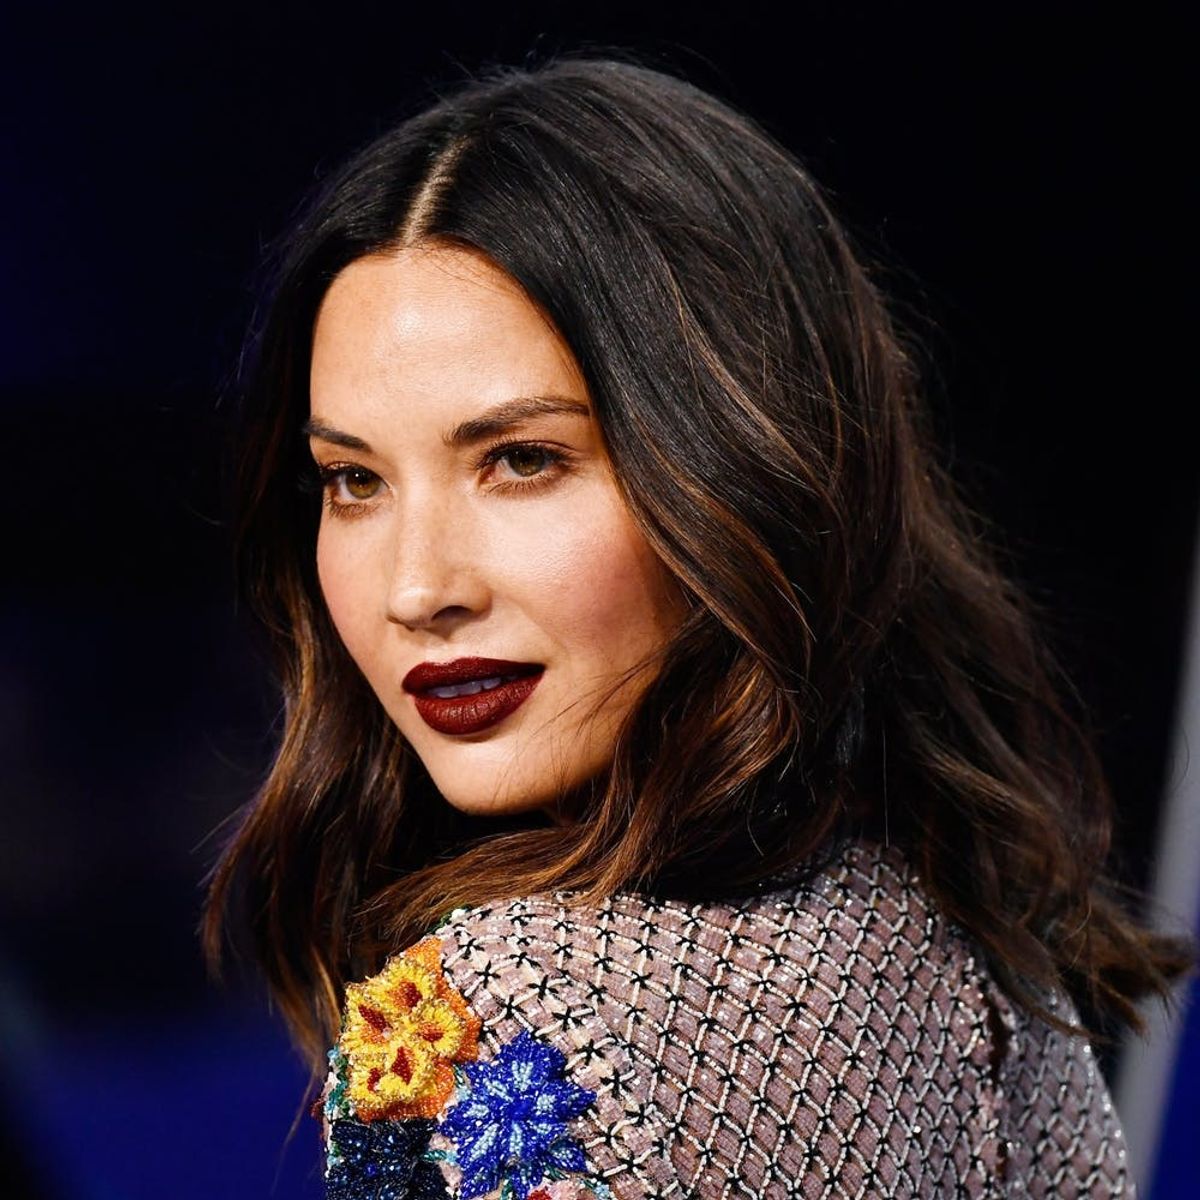 Olivia Munn Says Her Cameo in “Ocean’s Eight” Actually Cost Her Money